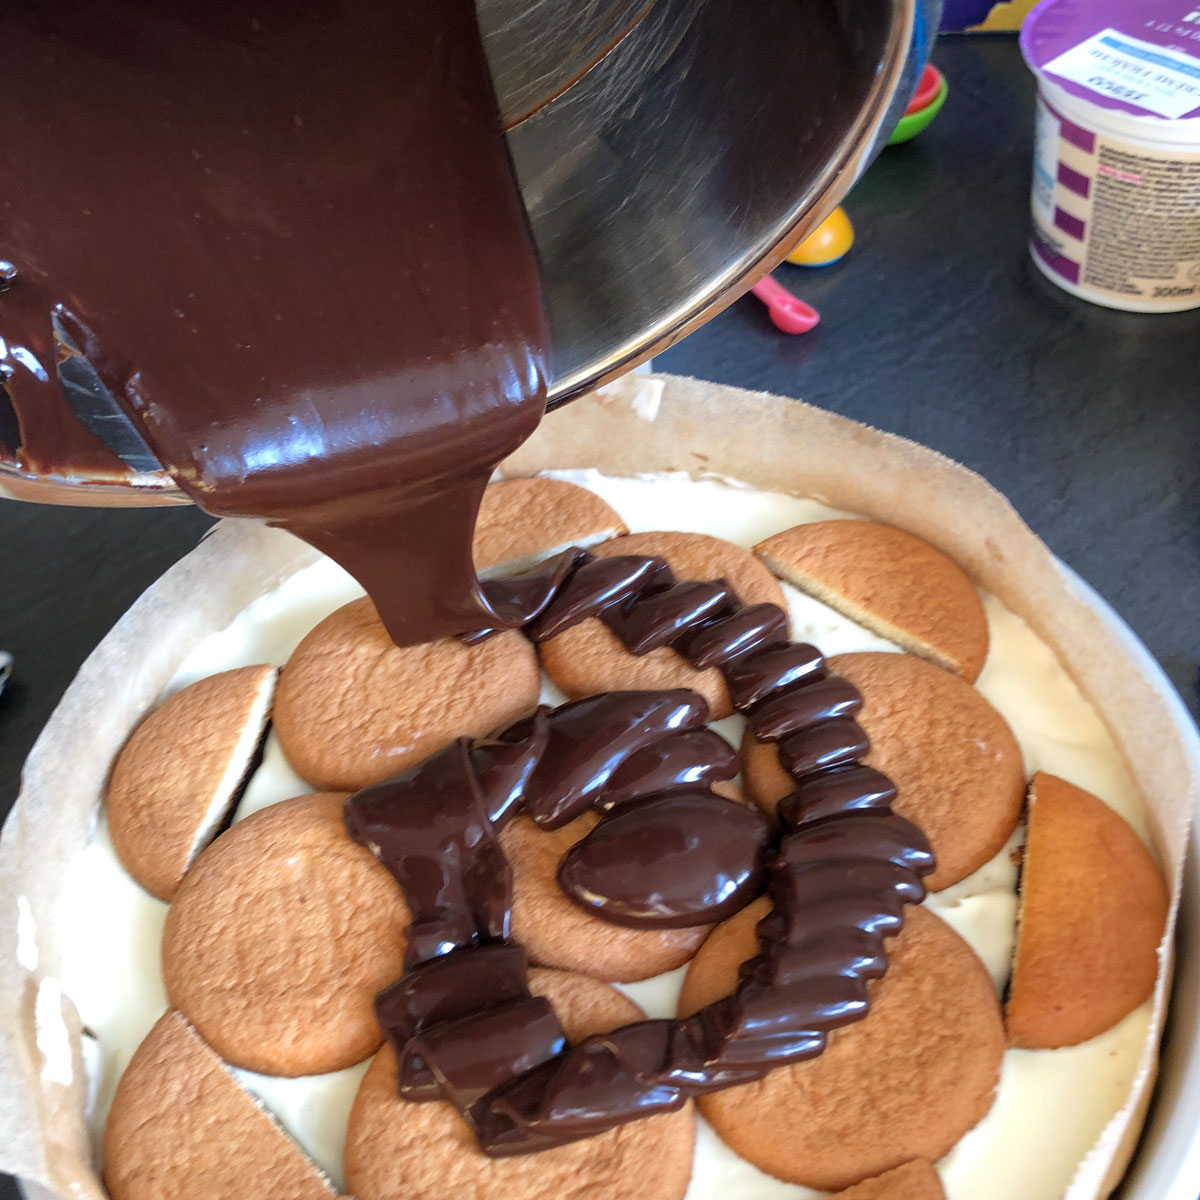 Pouring meted chocolate over Jaffa cakes.